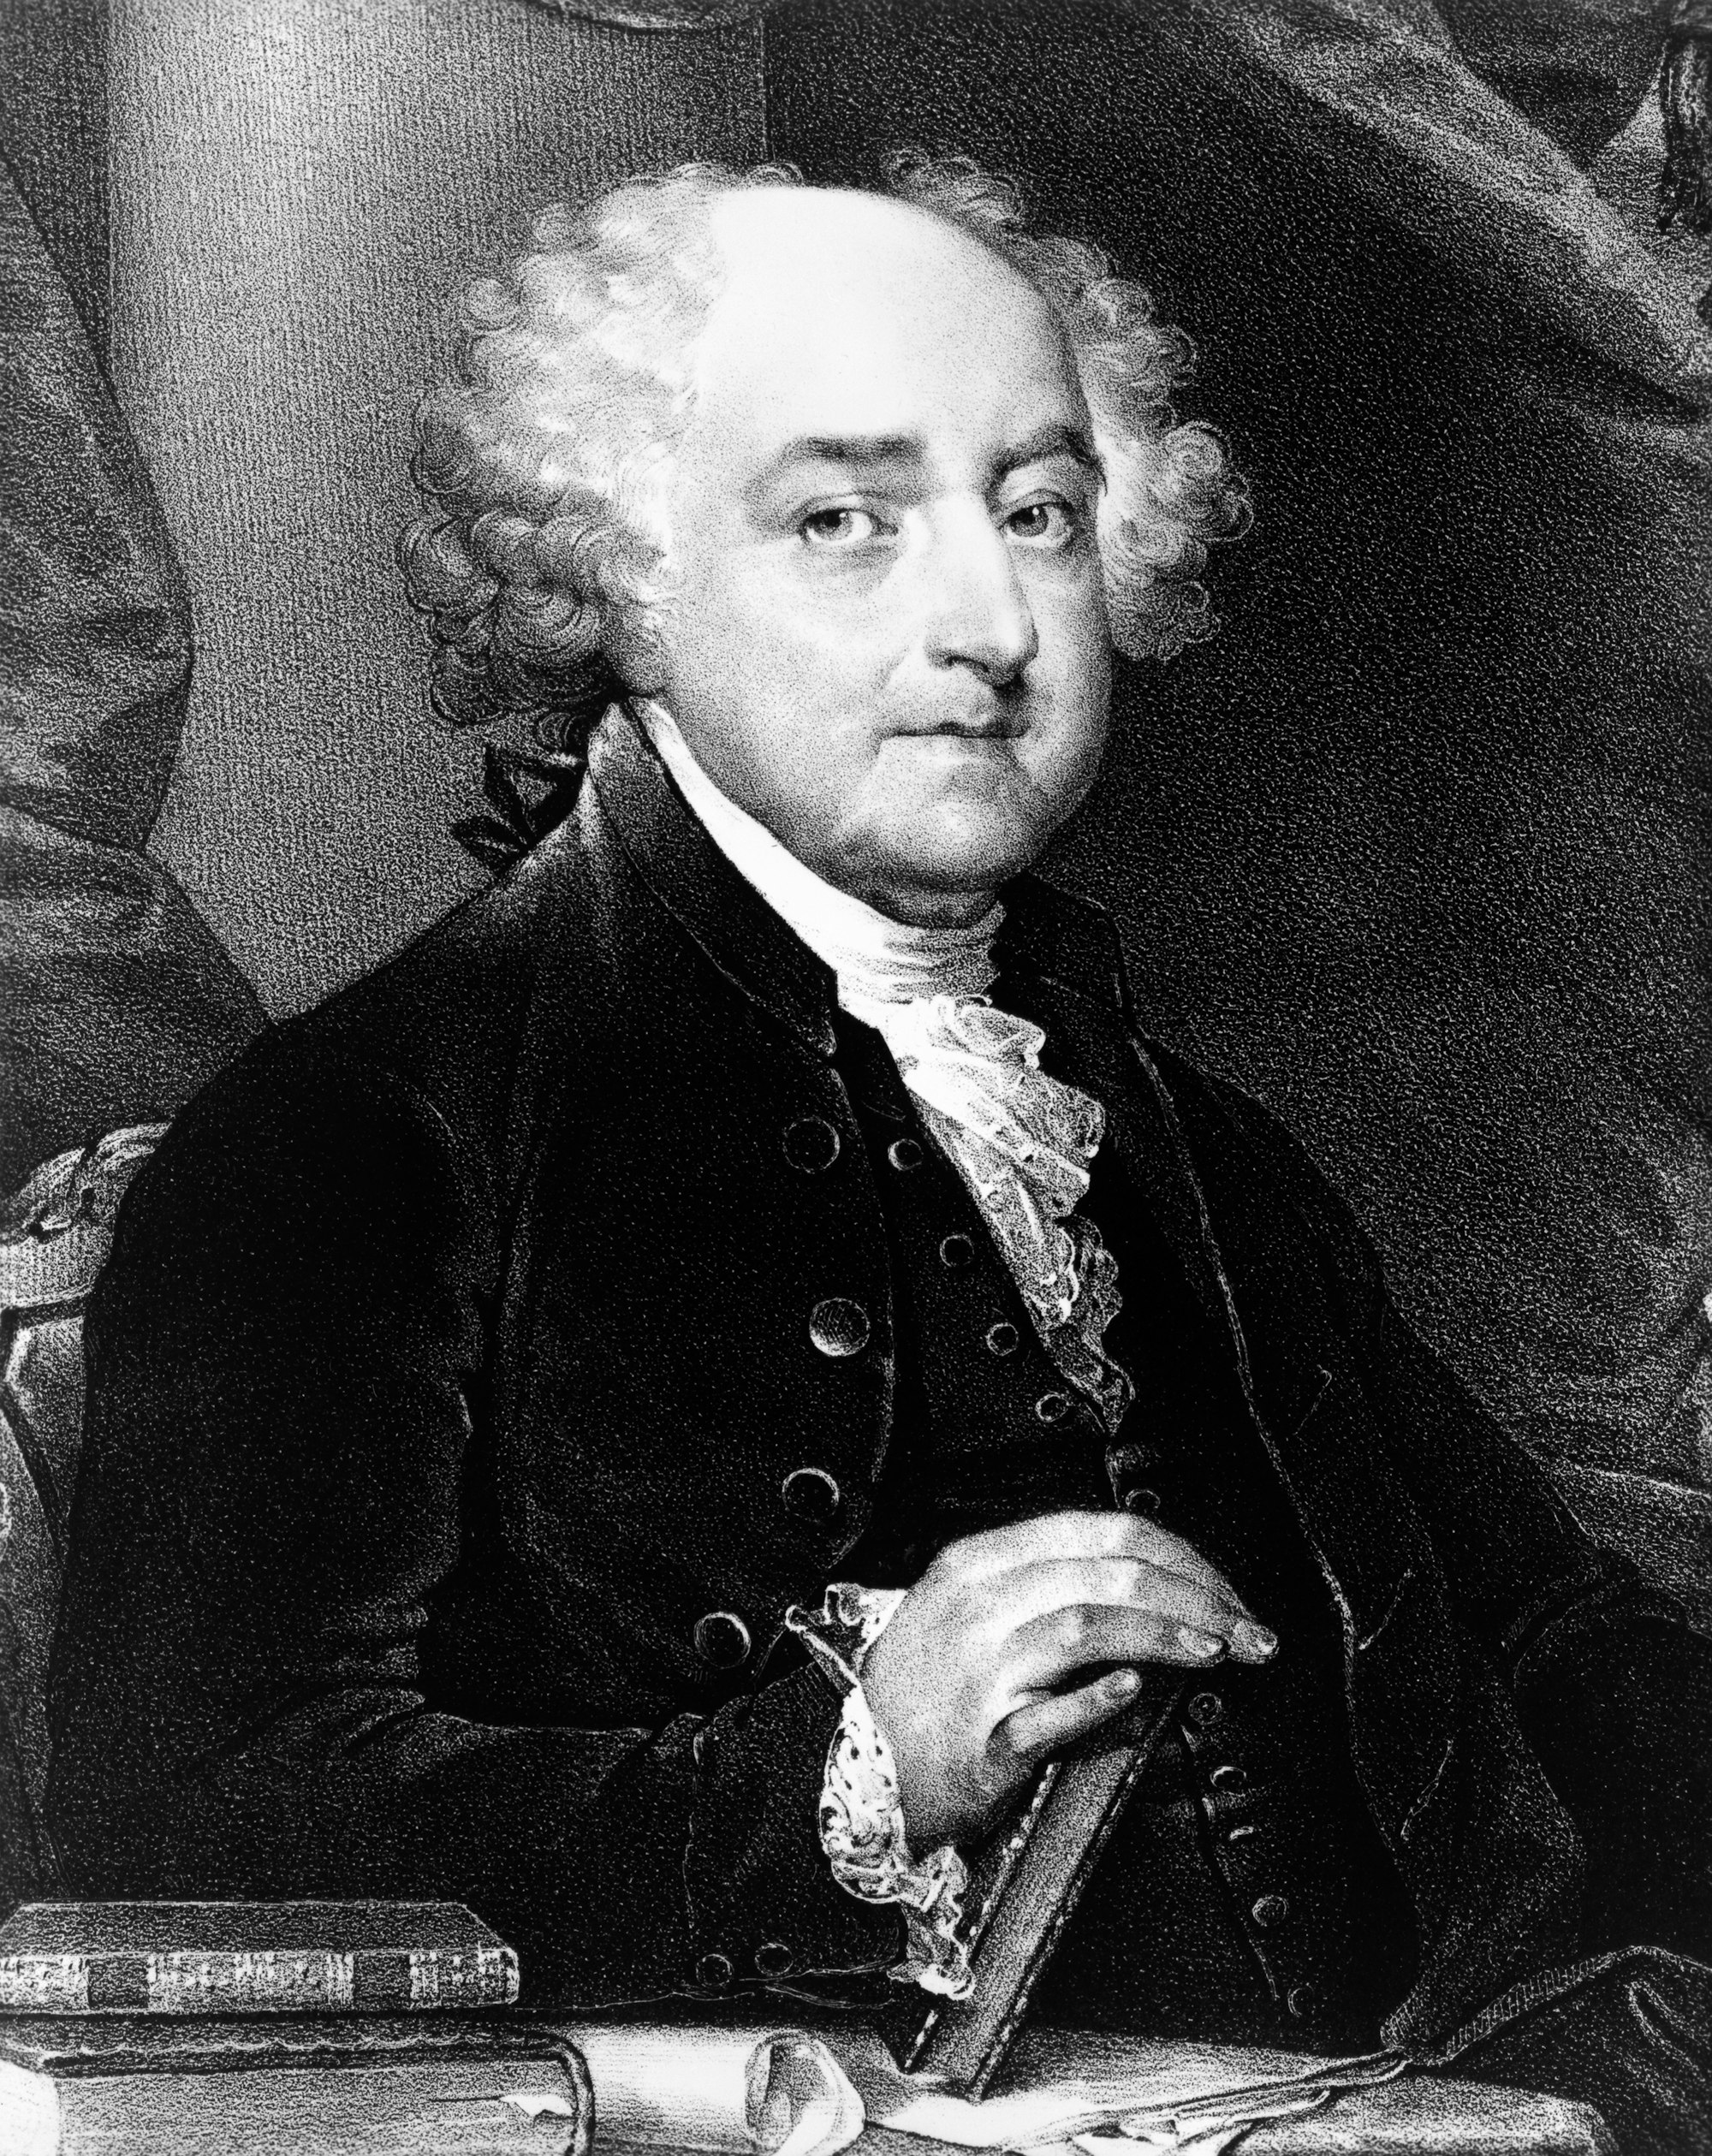 The Spirit of Liberty Ought to be Jealous: Thoughts by John Adams, 9 & 16 February, 1767